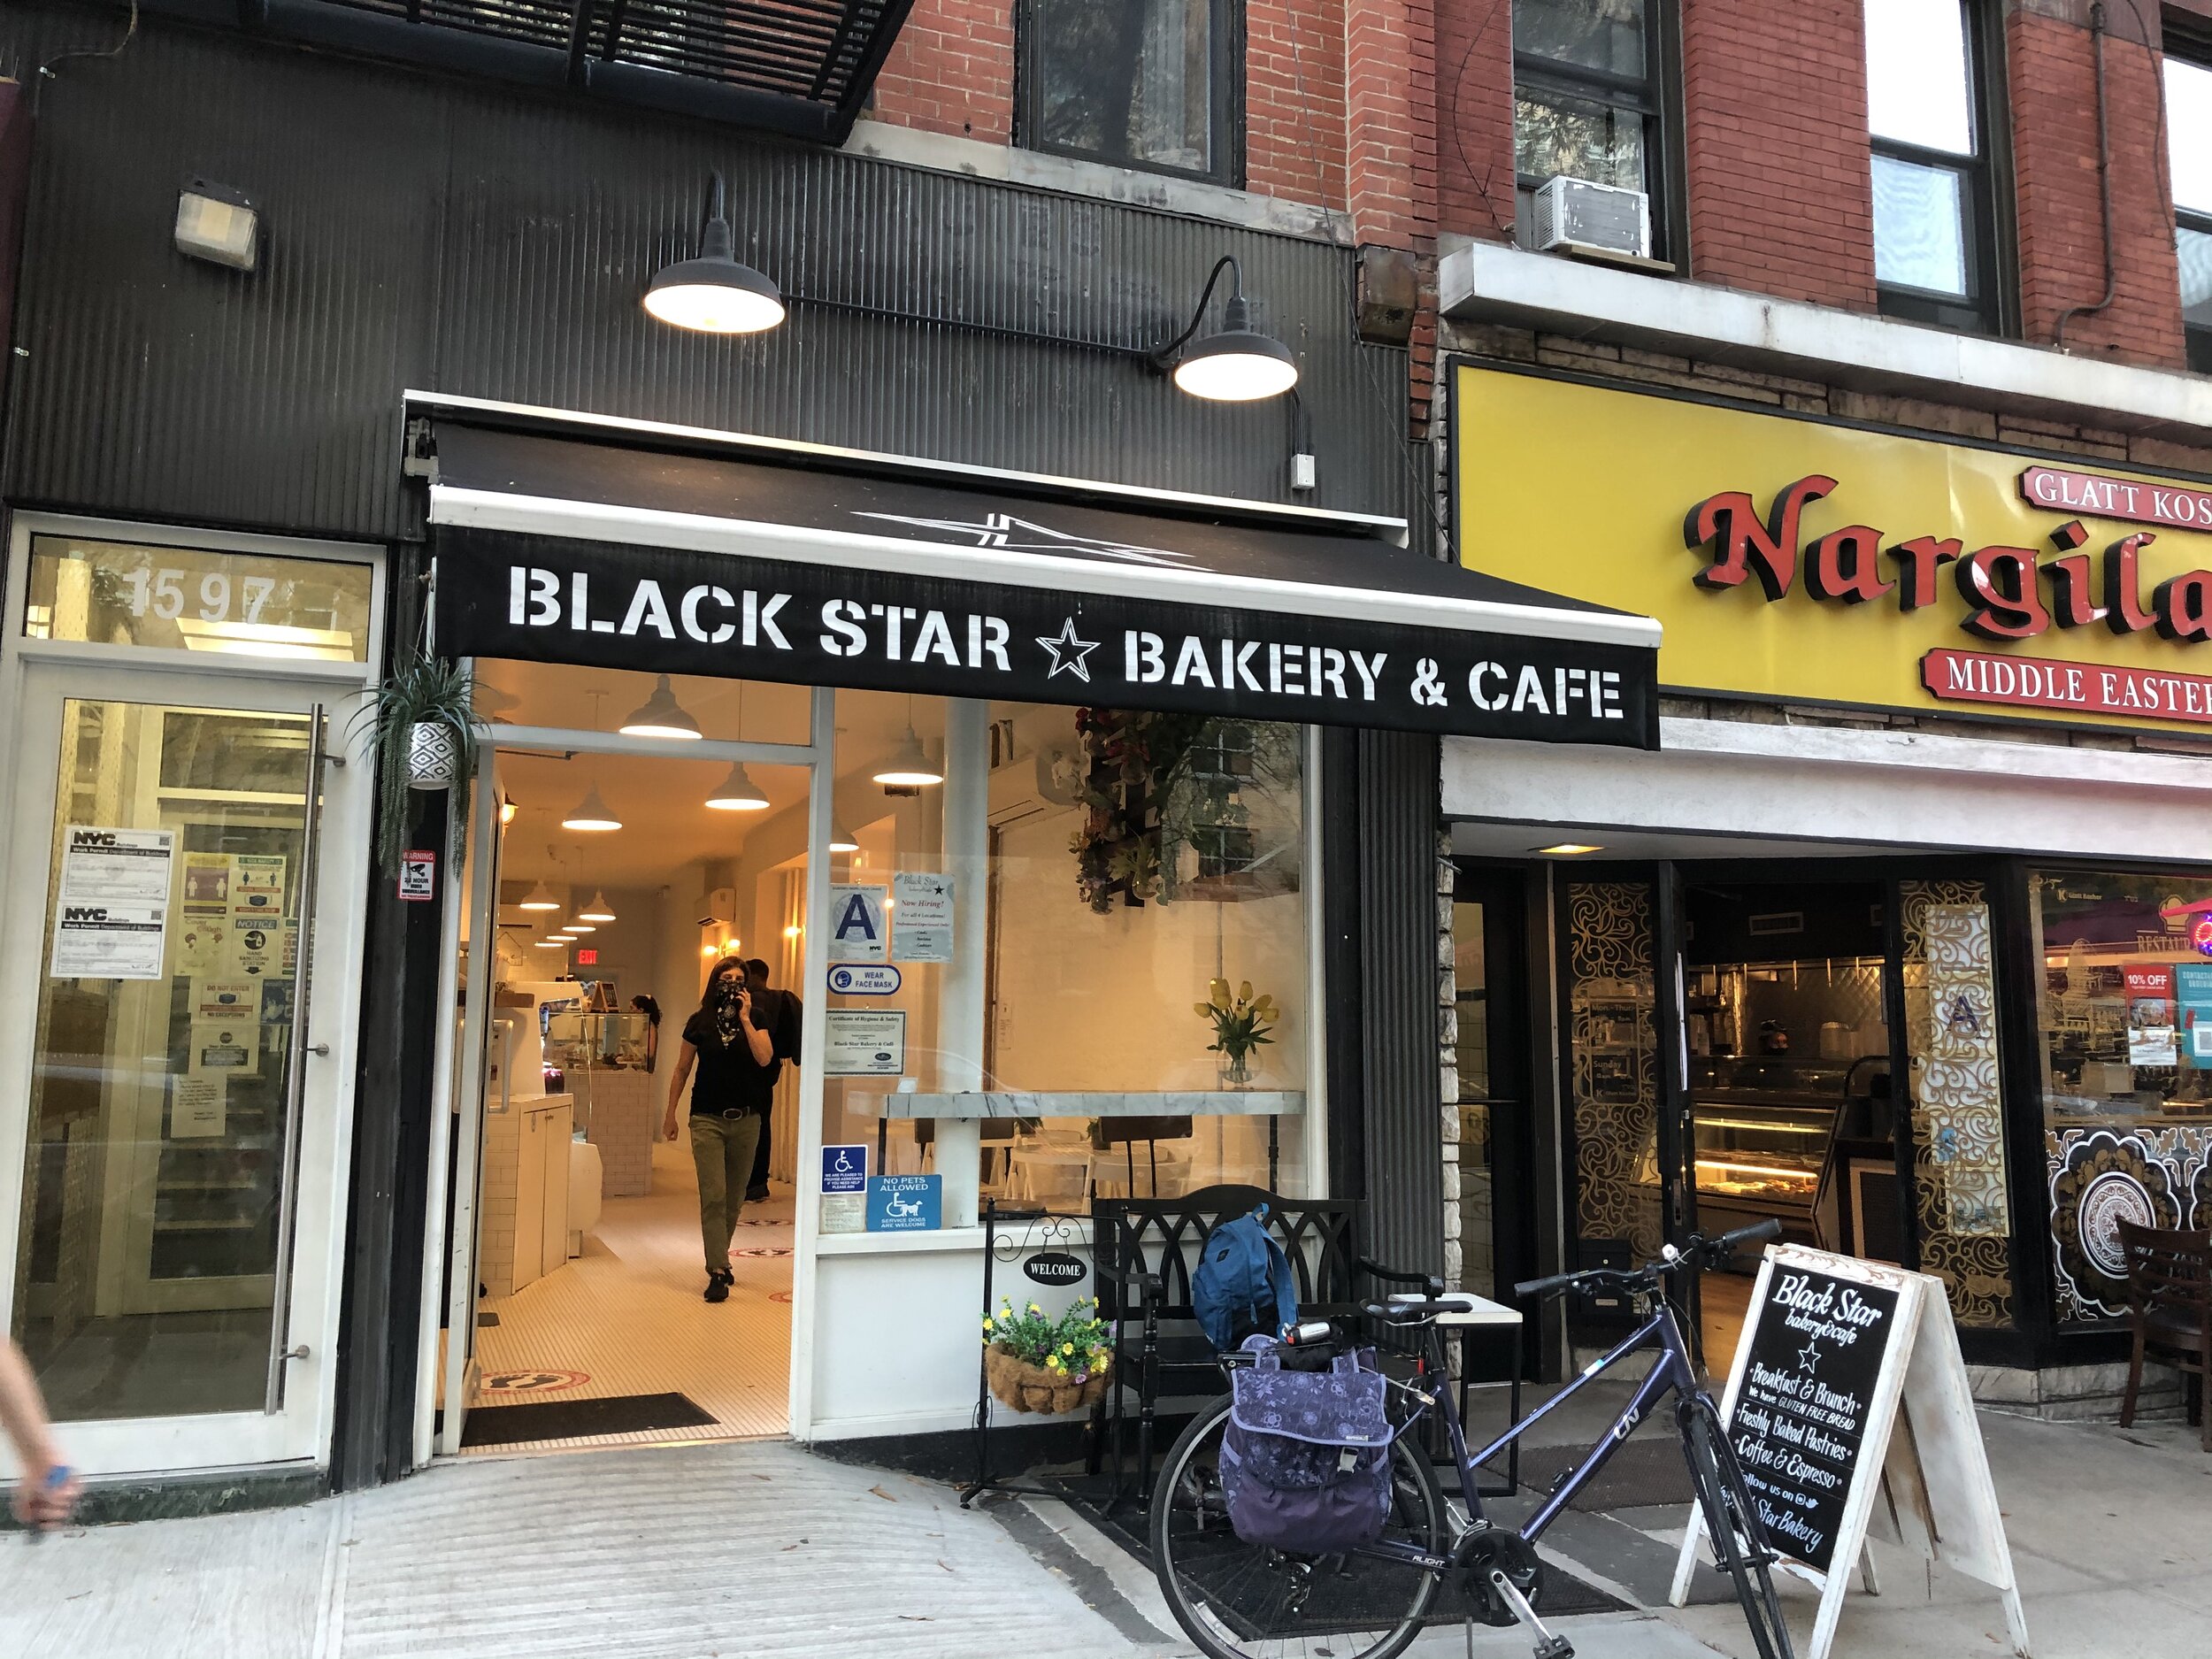 Back to Black Star...UES!